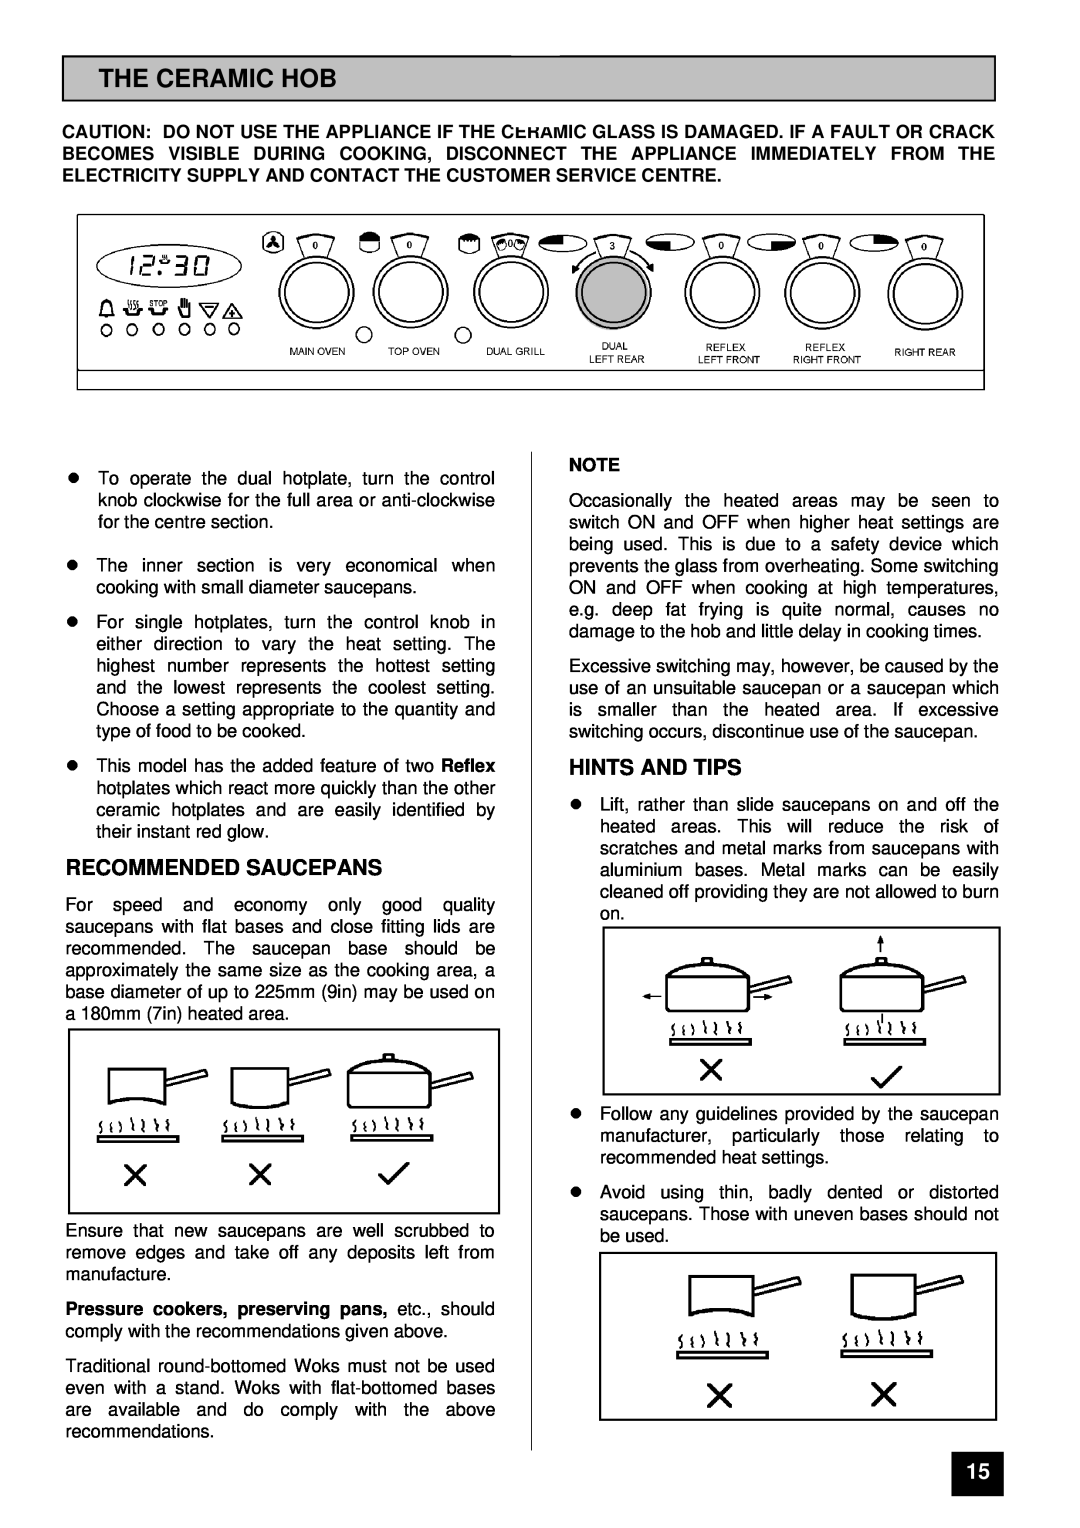 Tricity Bendix SI 452 installation instructions The Ceramic Hob, Recommended Saucepans, Hints And Tips 